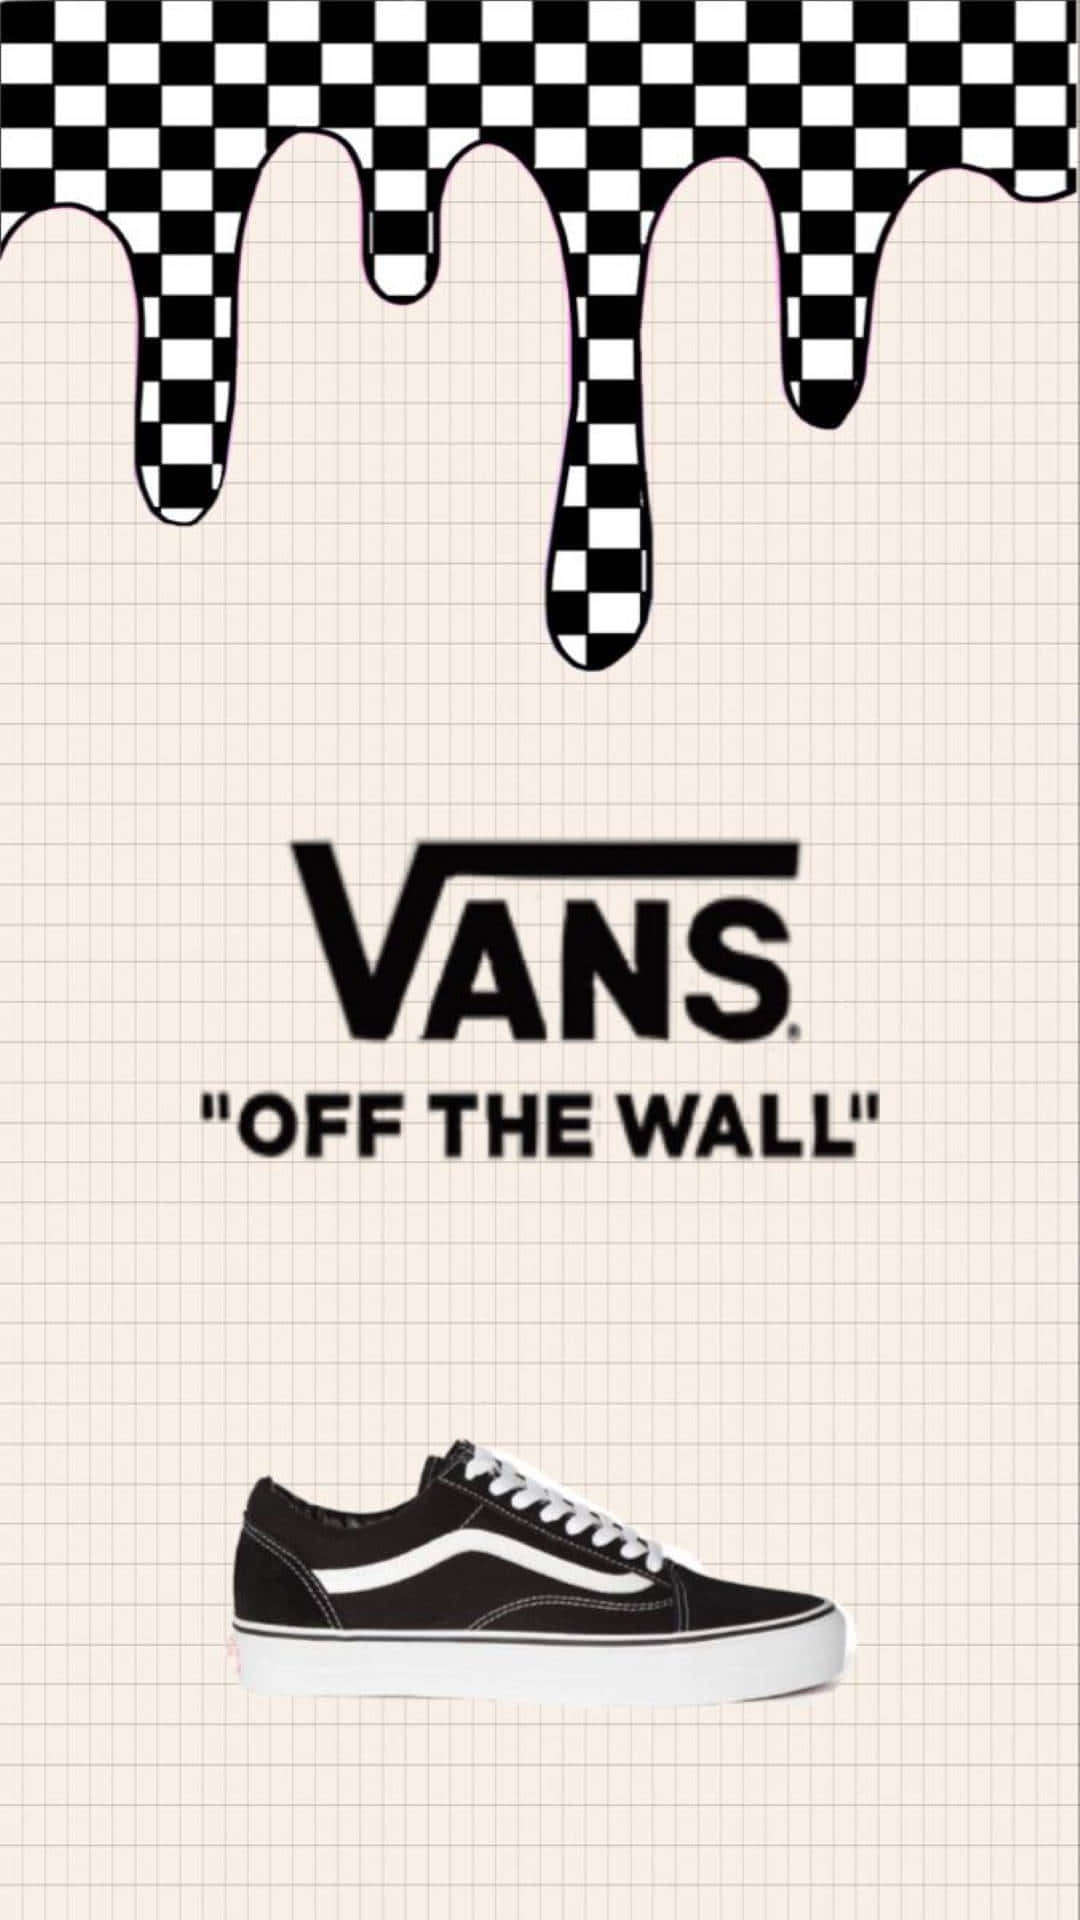 Show off your cool side with this Vans logo Wallpaper